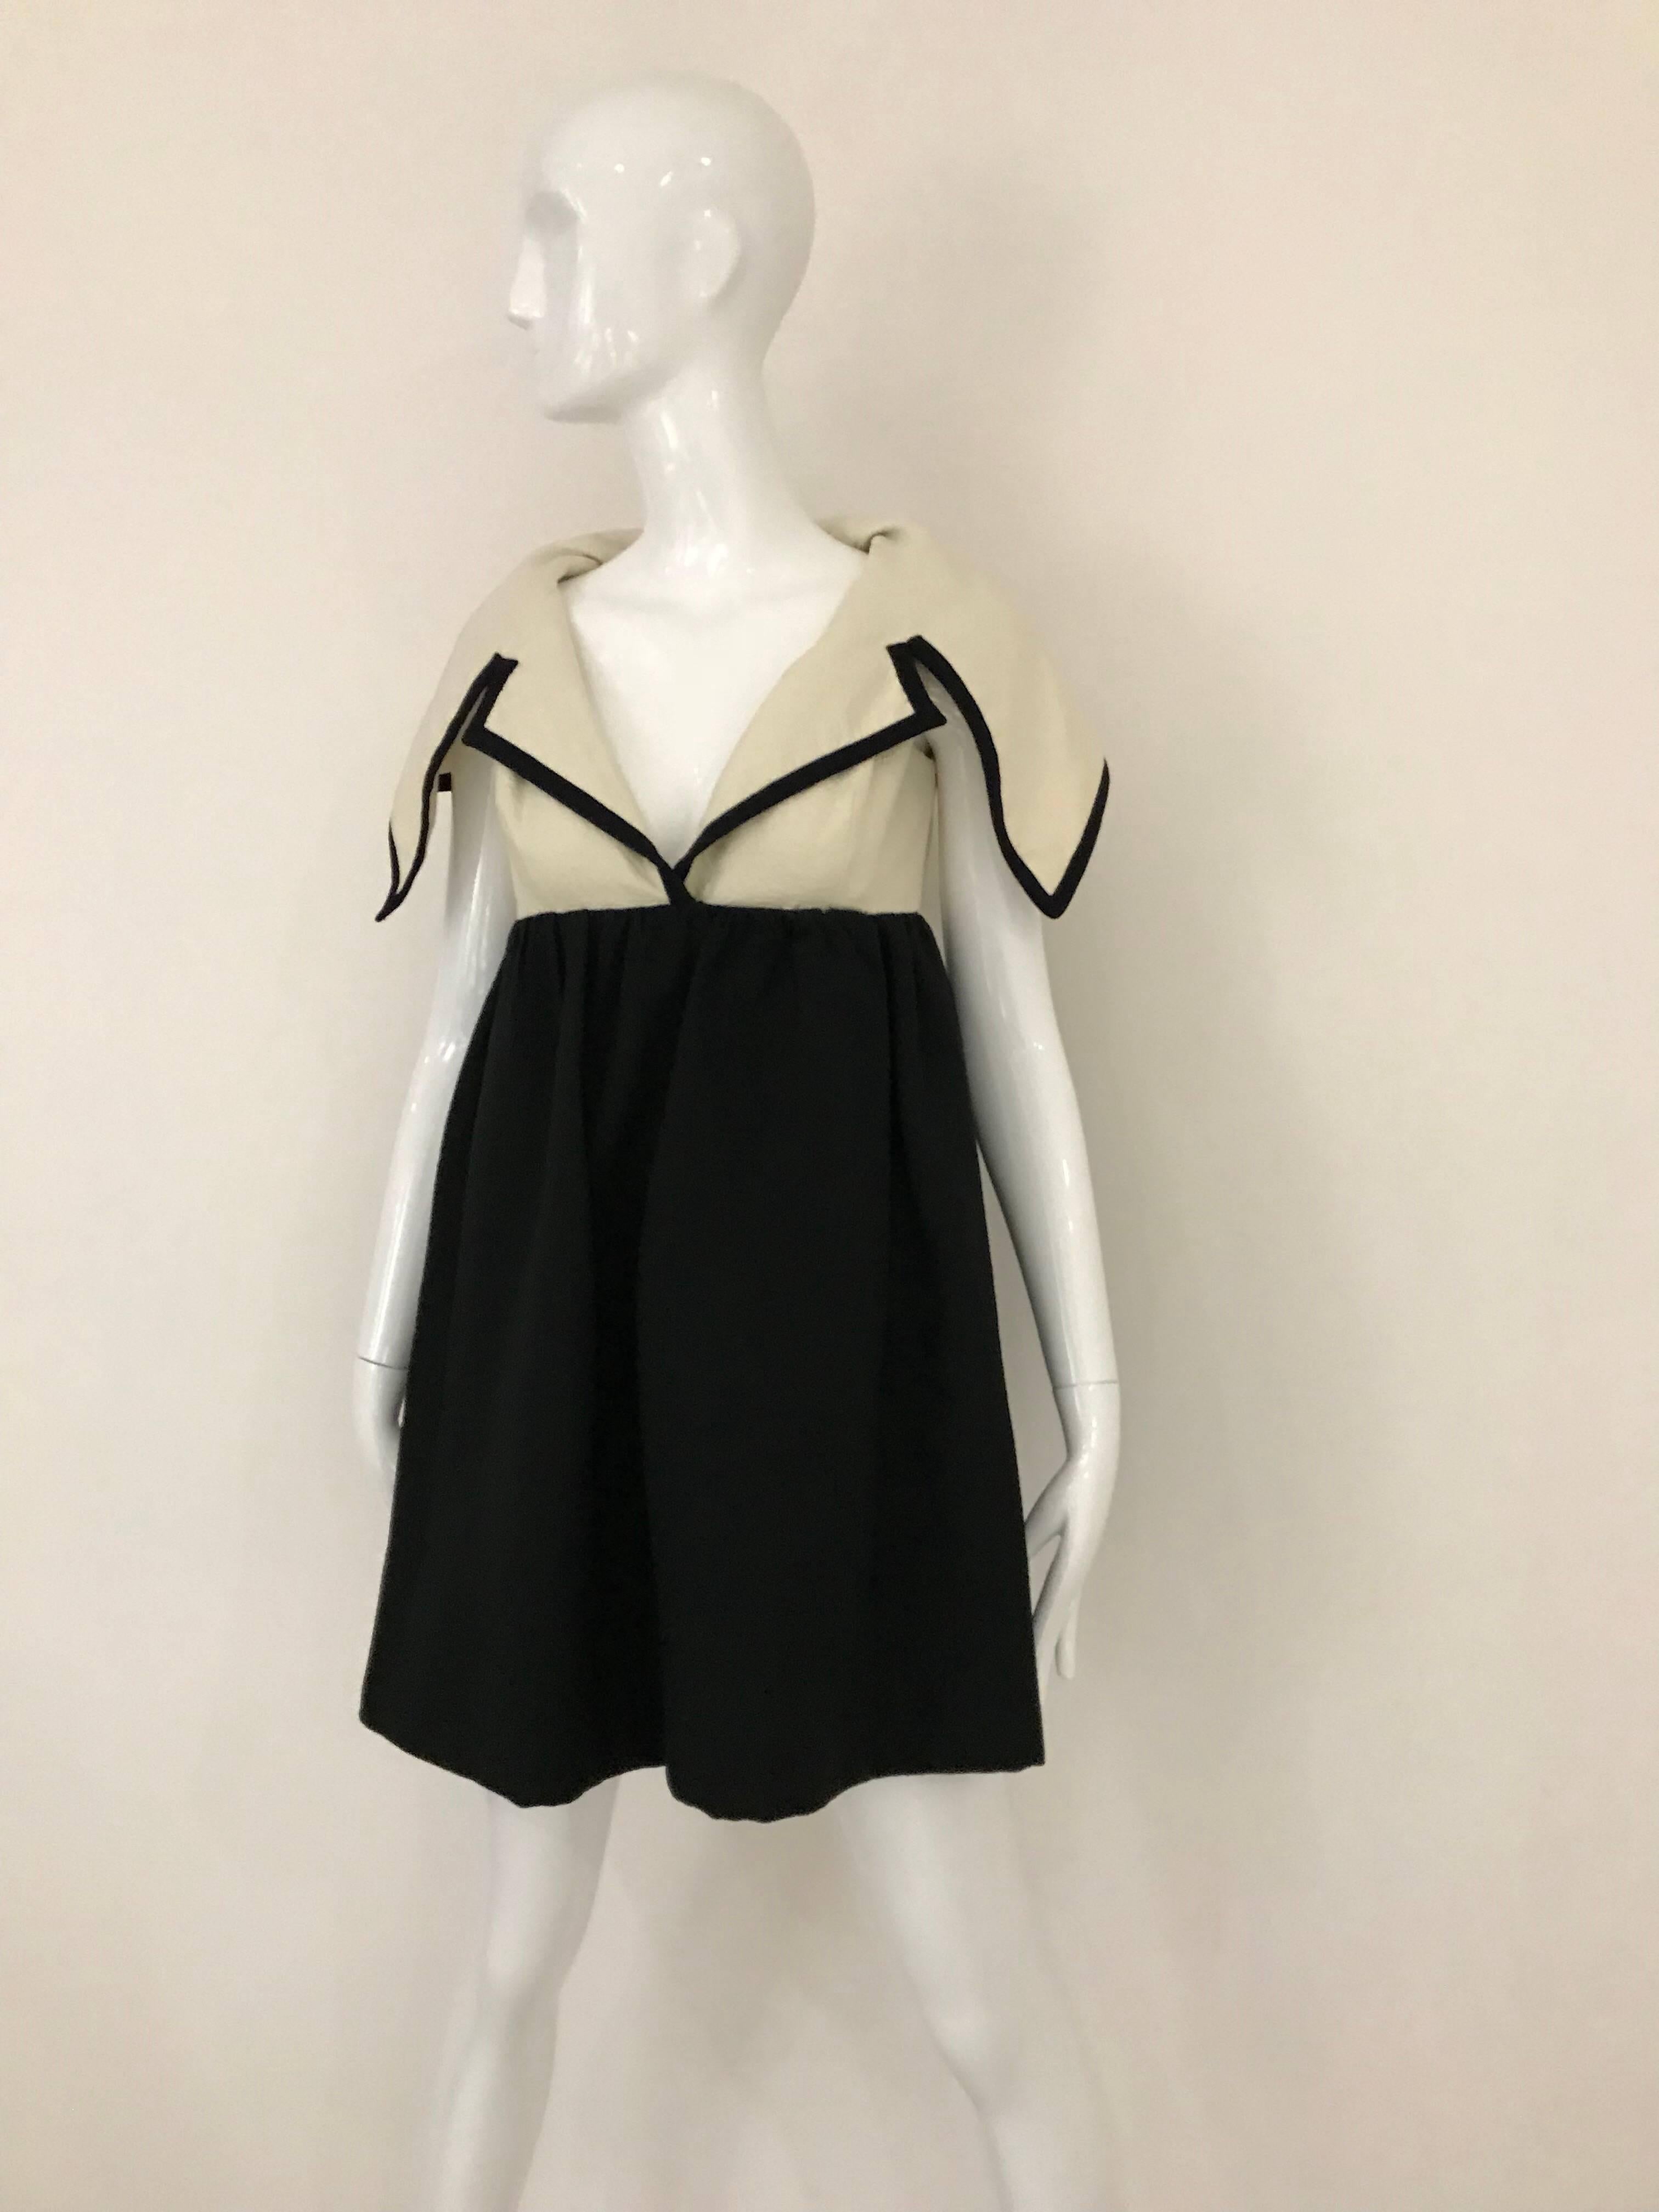 Vintage Geoffrey Beene Creme and Black Cotton Dress with exaggerated collar. Collar can be worn in different ways. Best fit size 2.
** slightly yellow stains near collar area not noticeable from outside.
**** This Garment has been professionally Dry